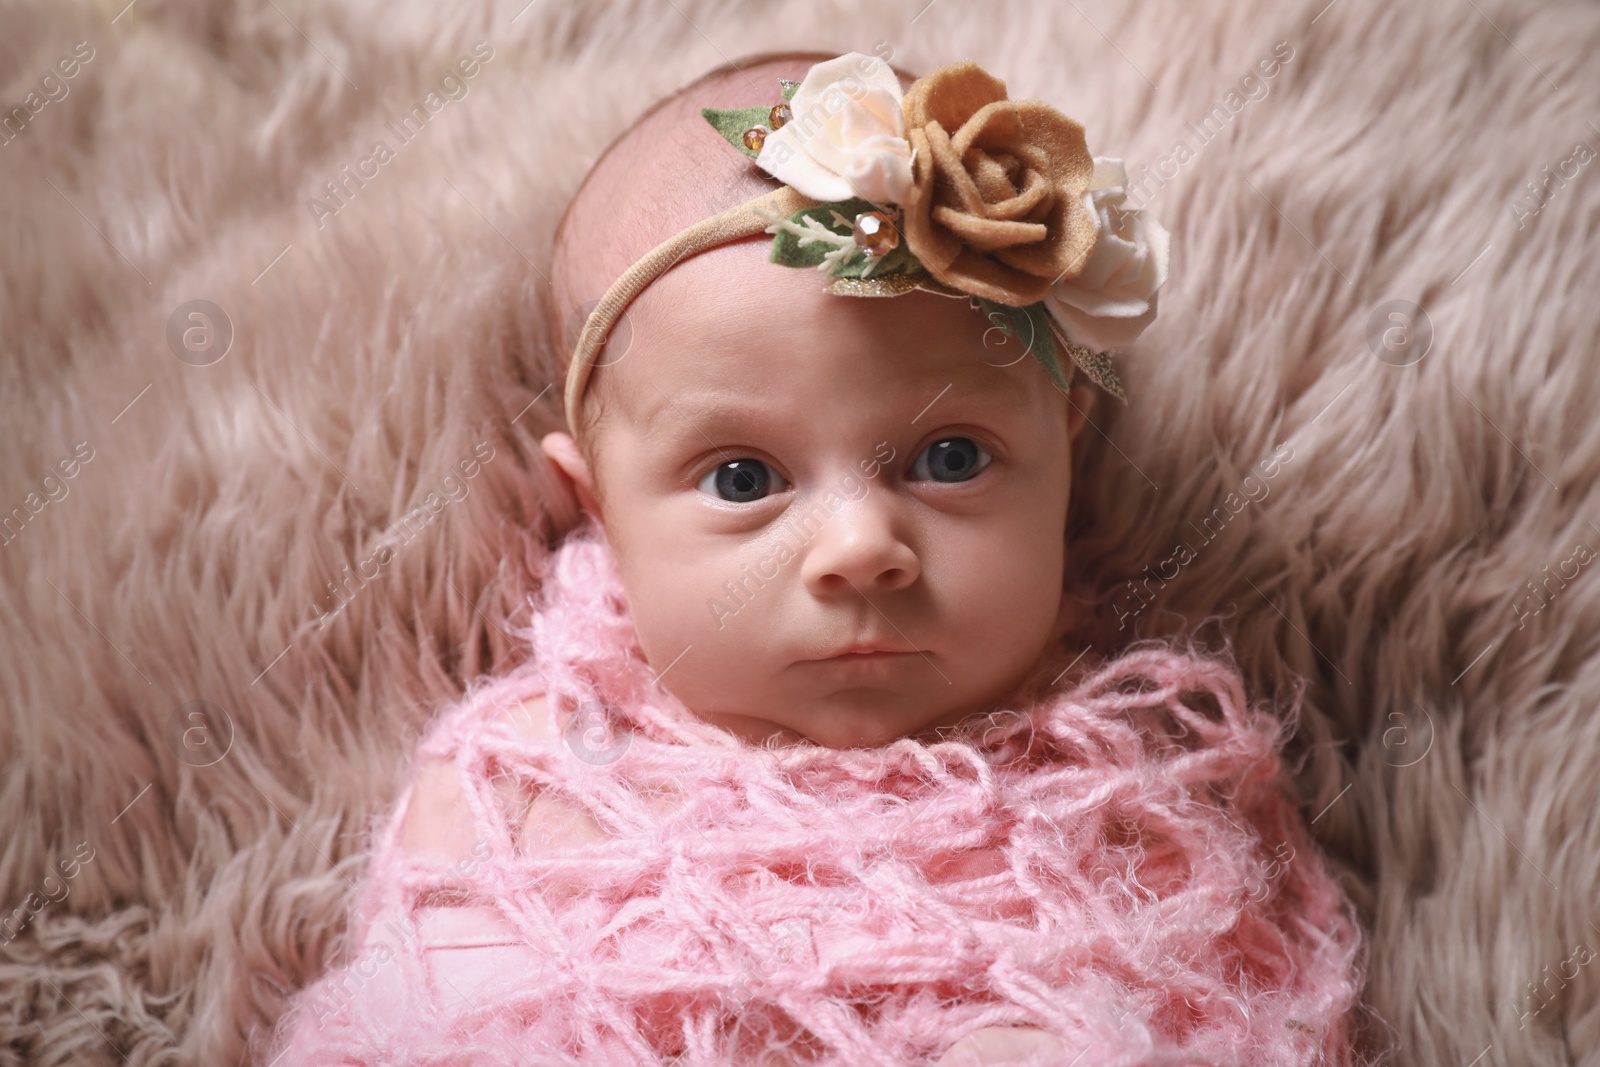 Photo of Cute newborn baby girl with floral headband lying on fuzzy rug, top view